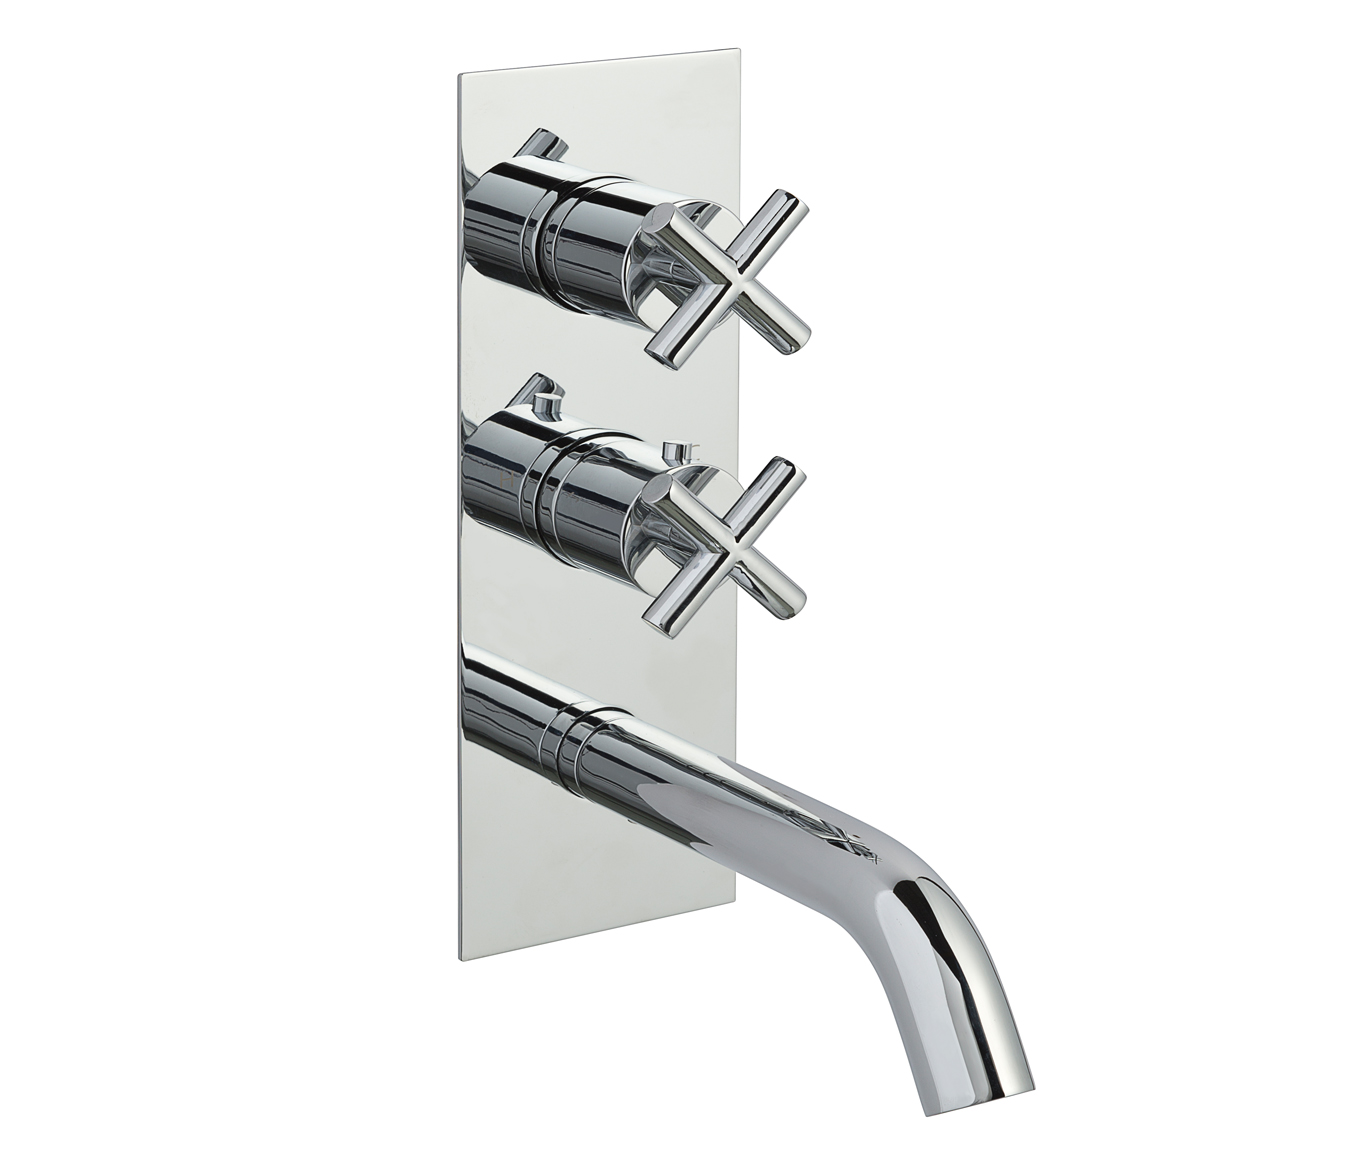 Solex thermostatic concealed 2 outlet shower valve with spout, MP 0.5